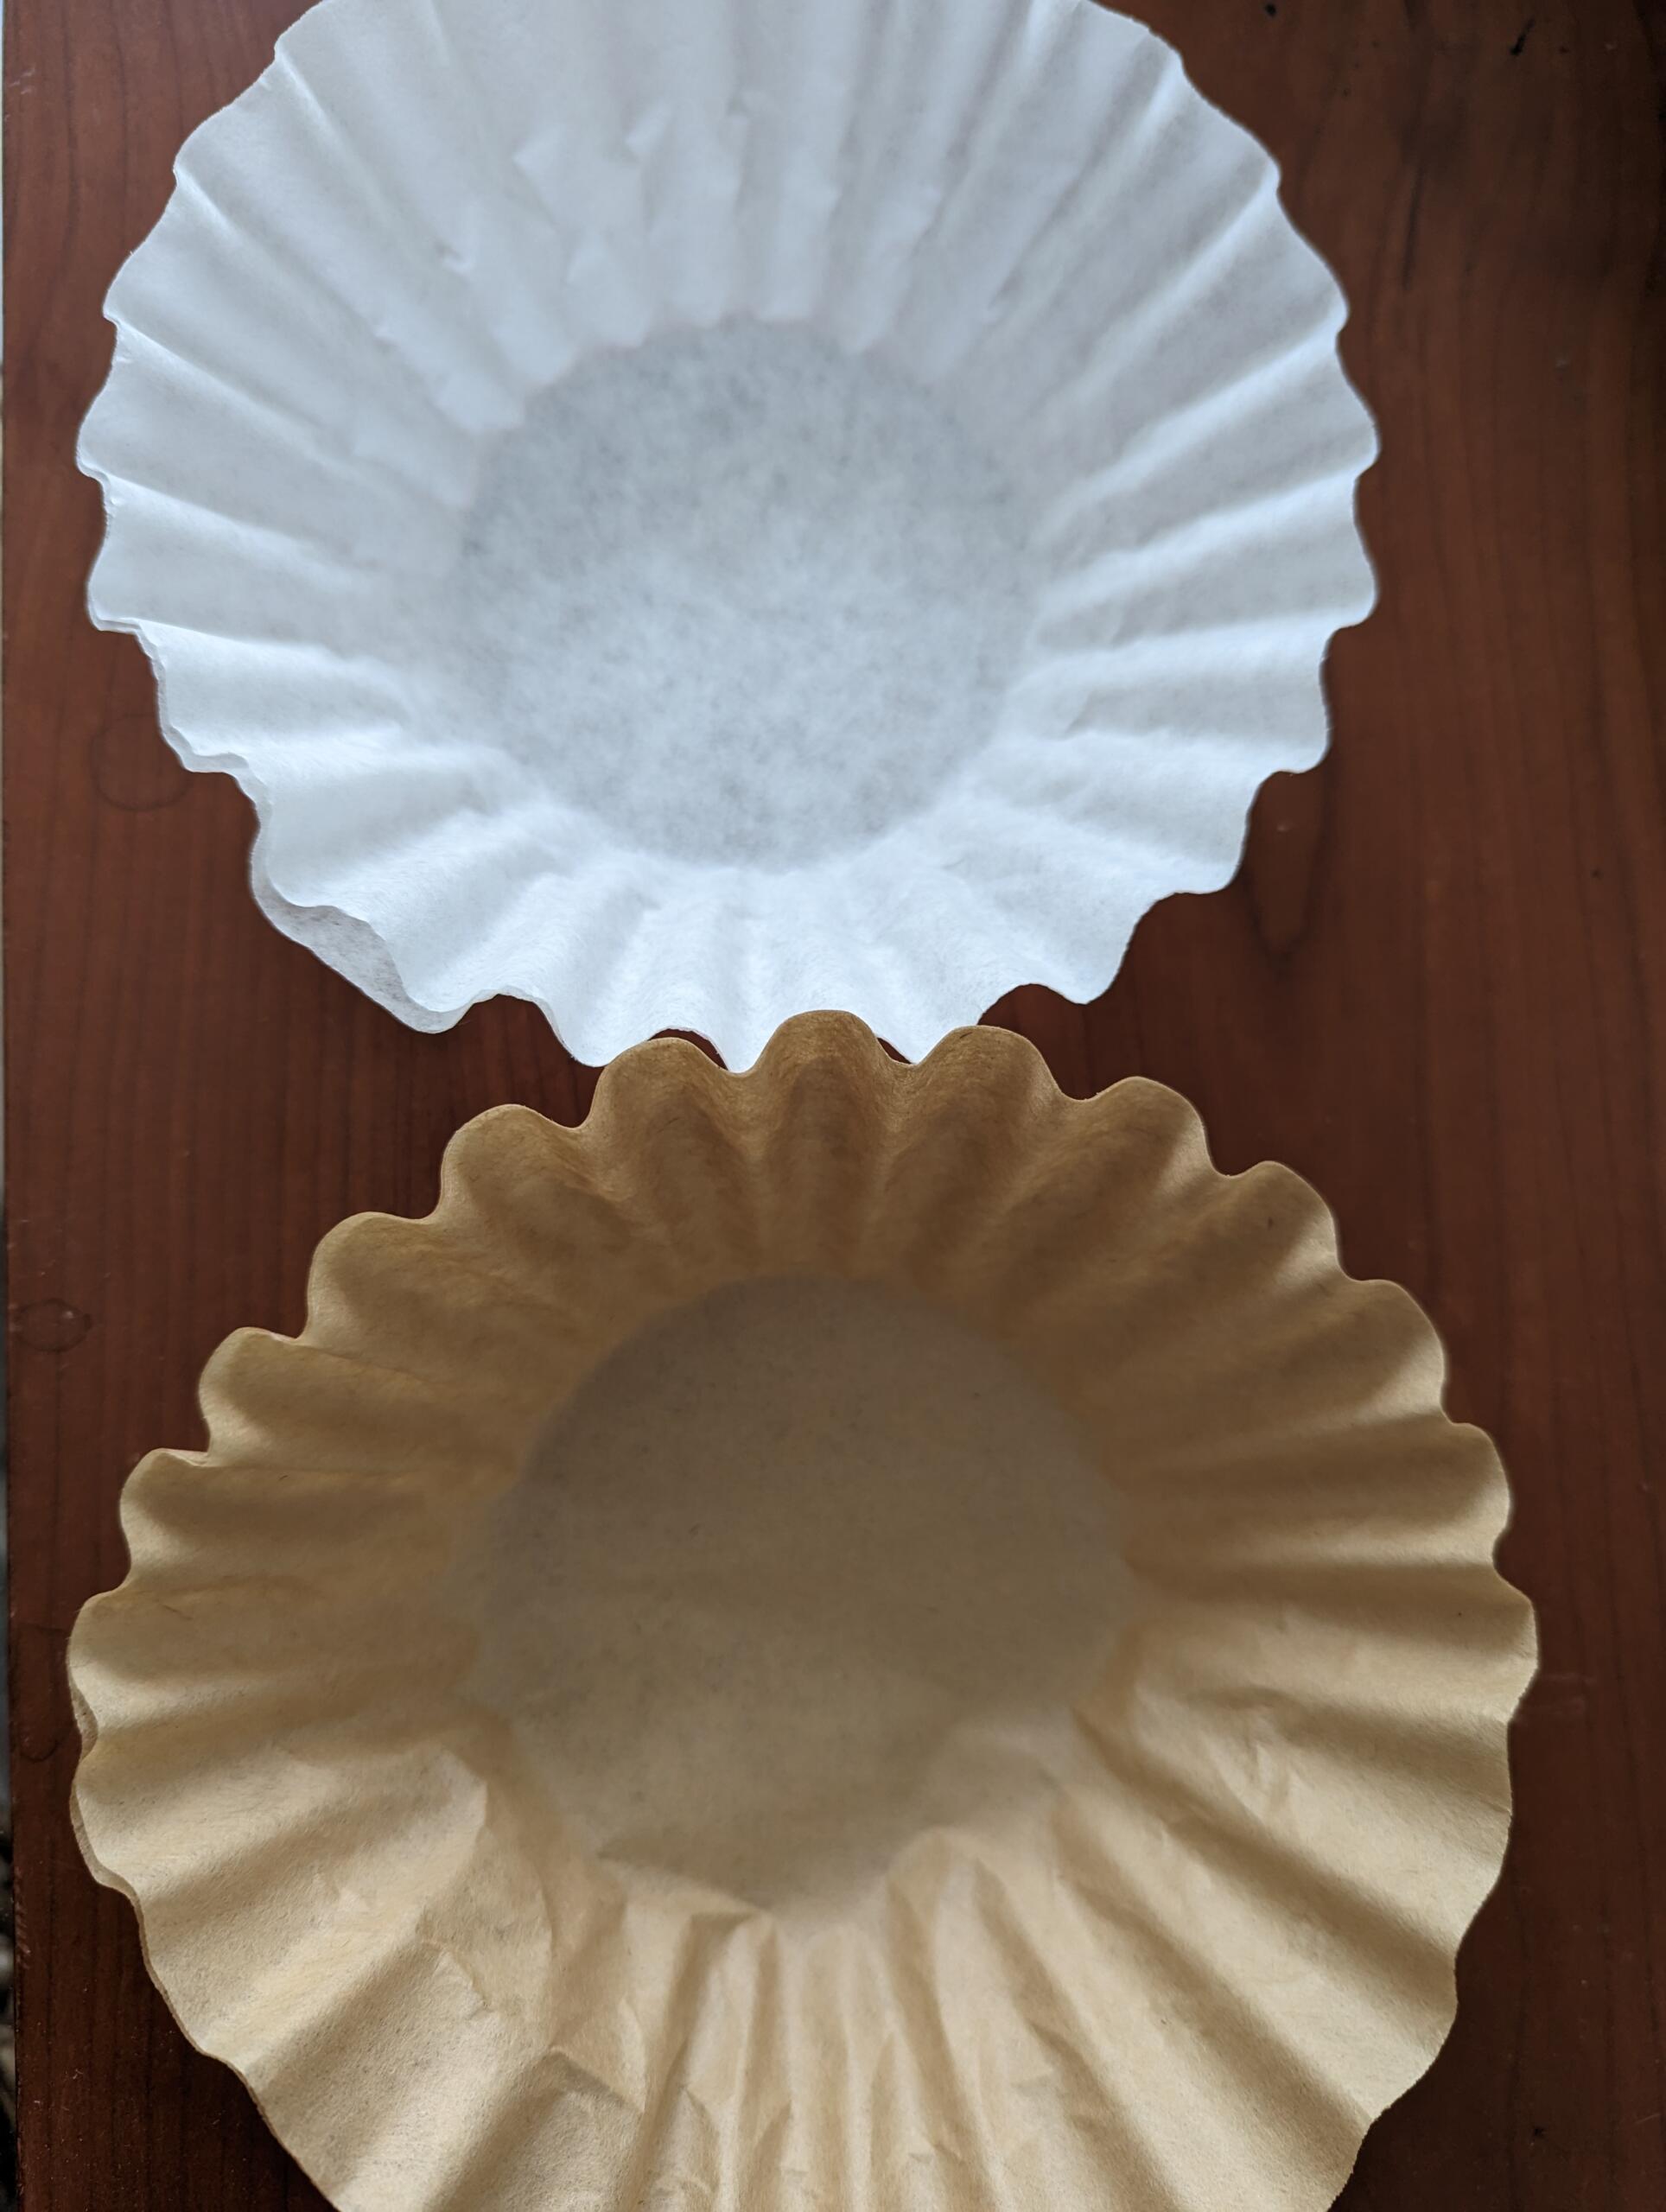 Bleached vs Unbleached Coffee Filters: Which One is Better?